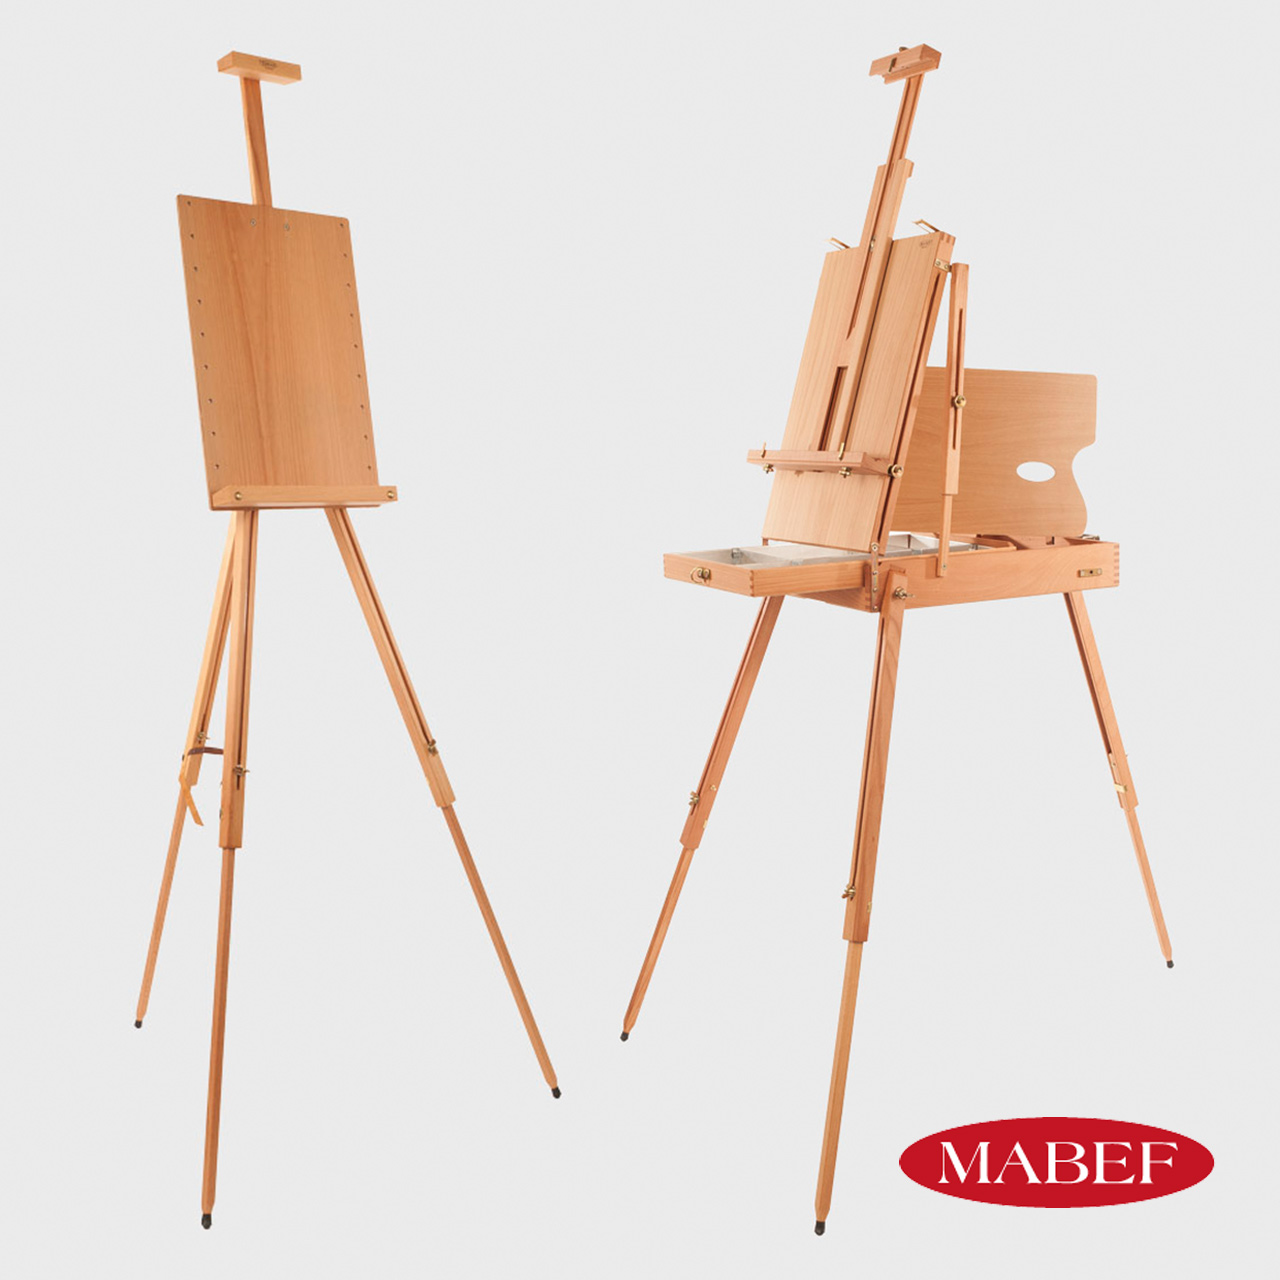 MABEF M22 and M26 Easels